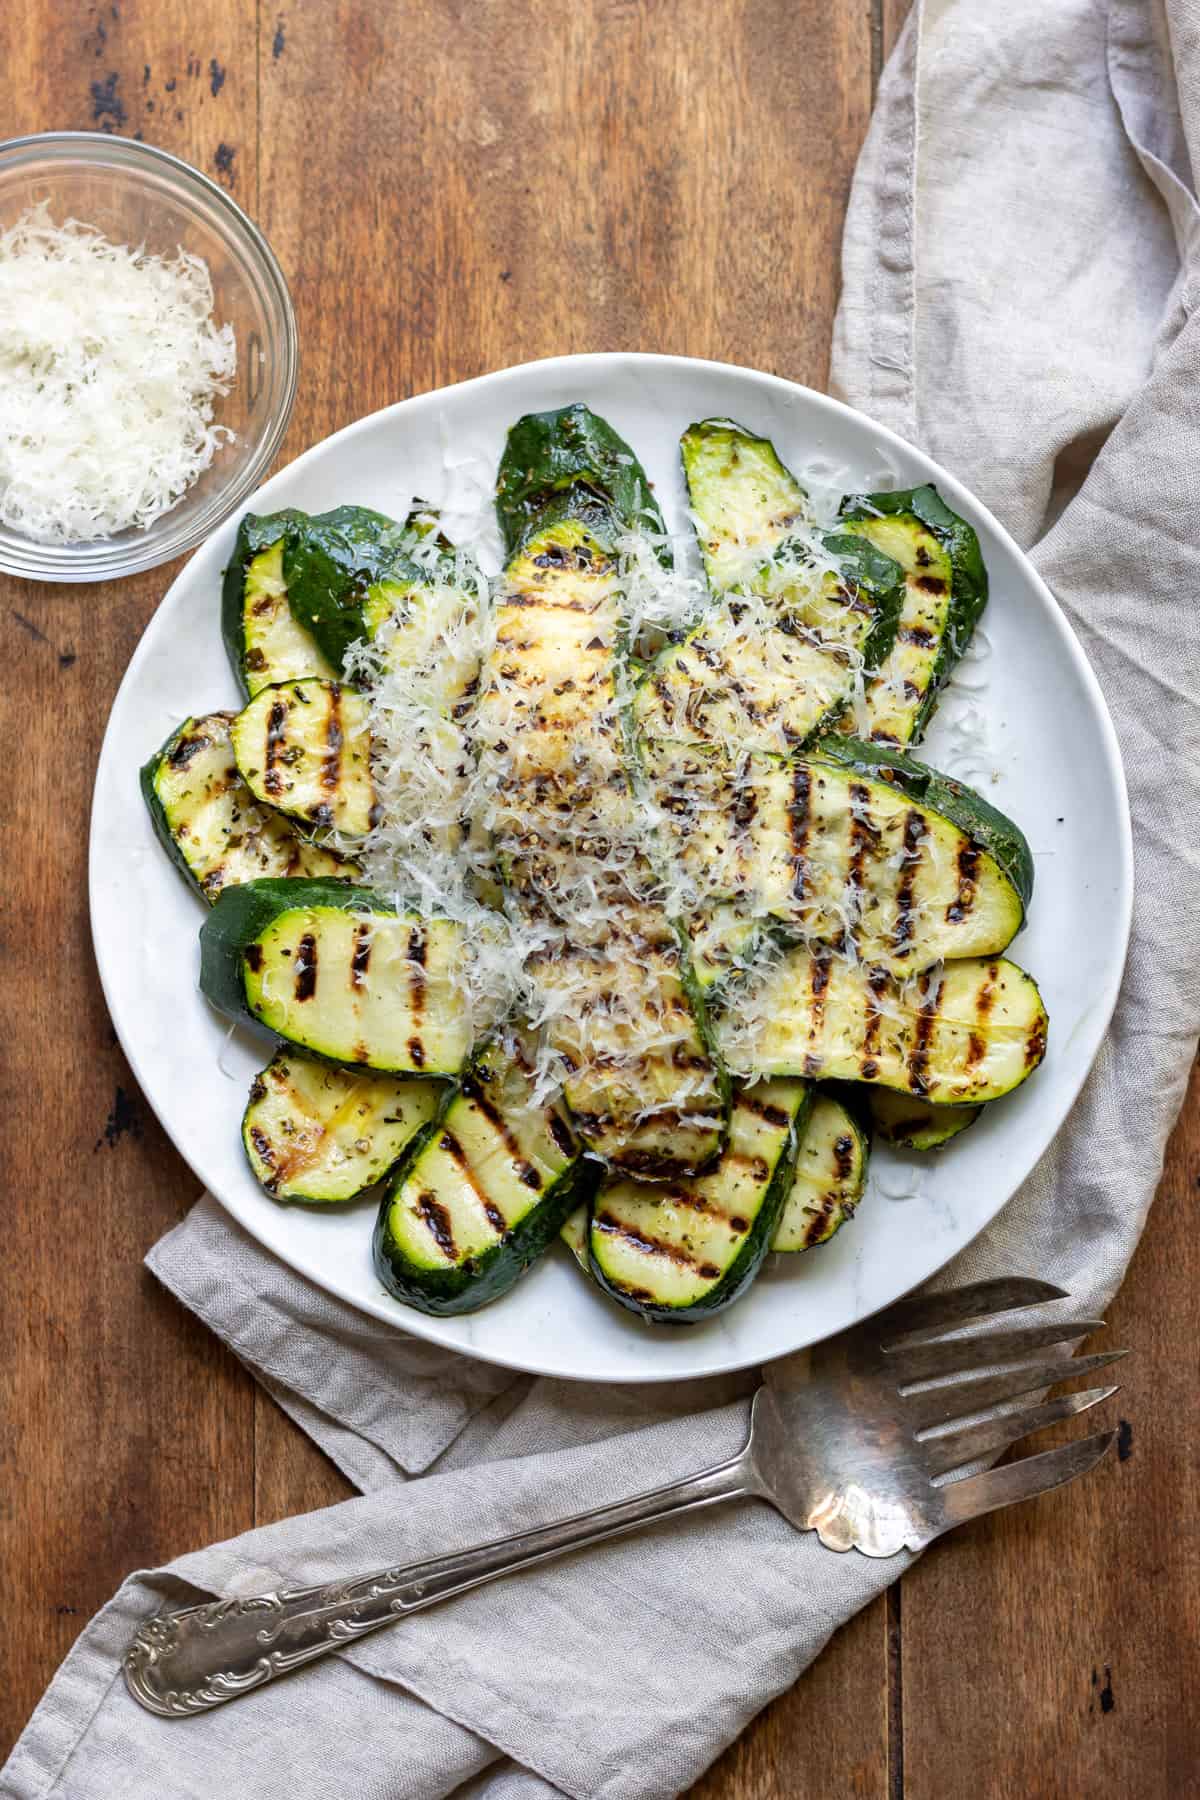 Wooden table with a serving dish of grilled zucchini.